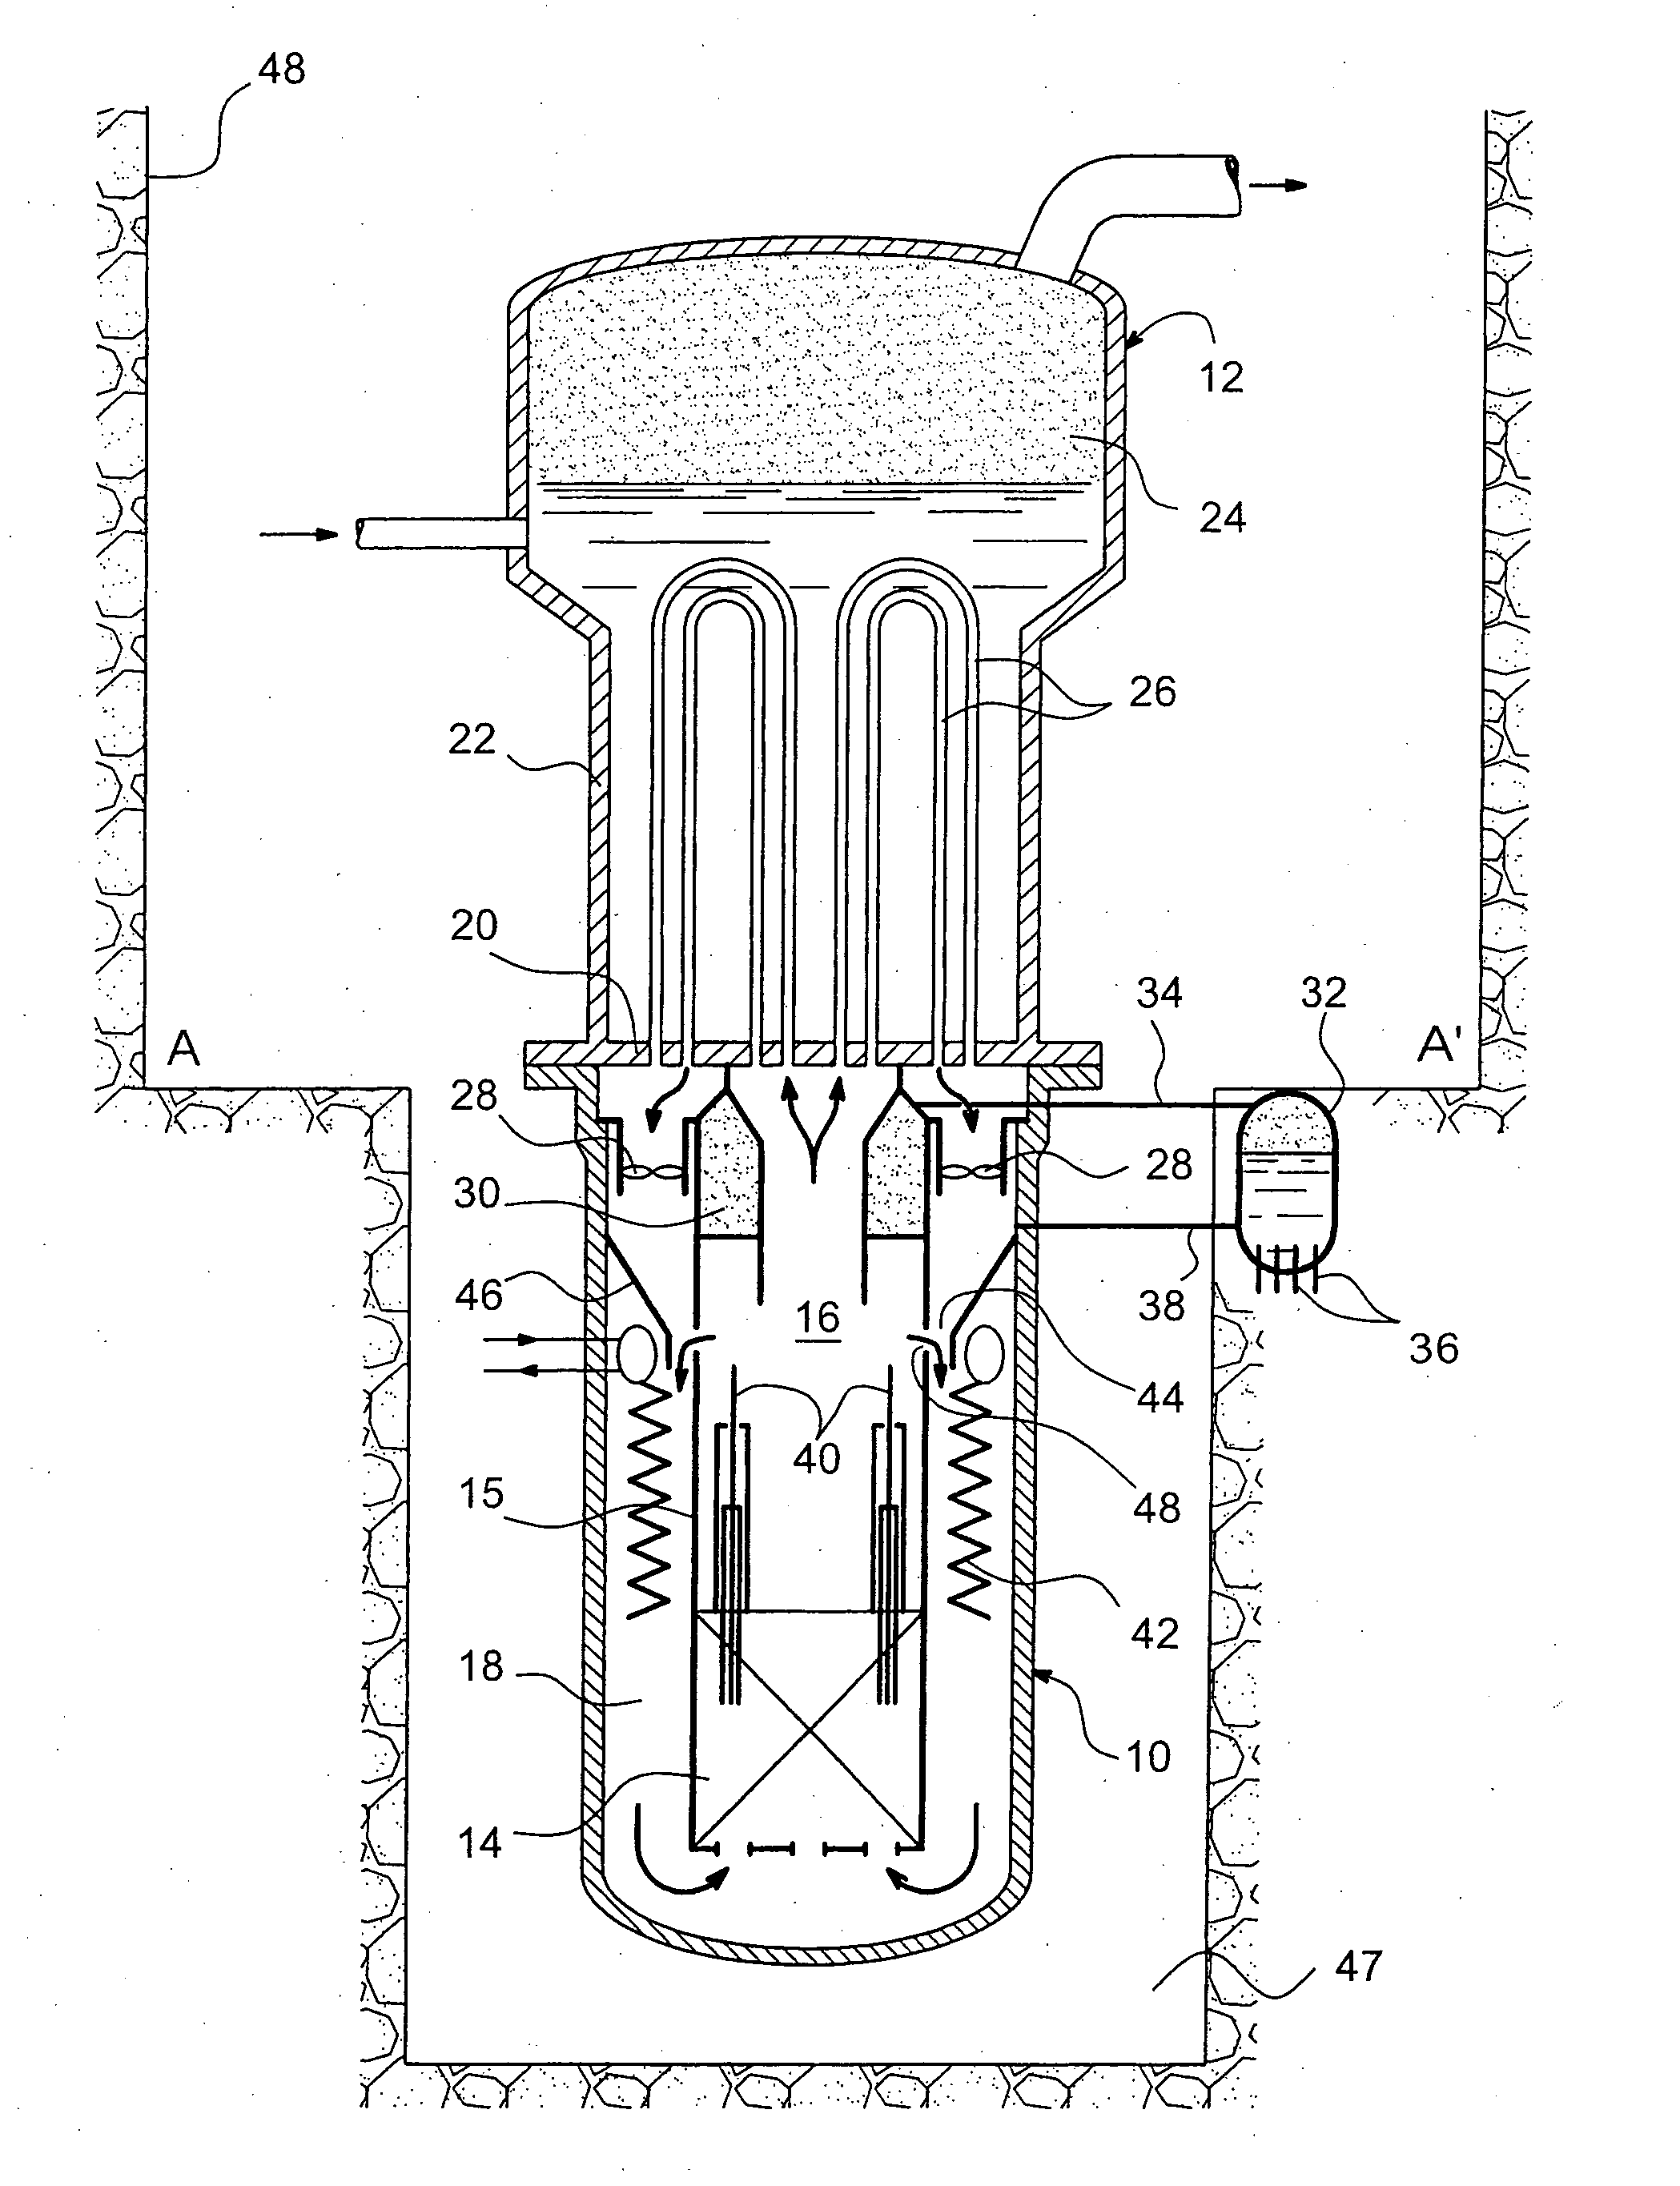 Compact pressurized water nuclear reactor